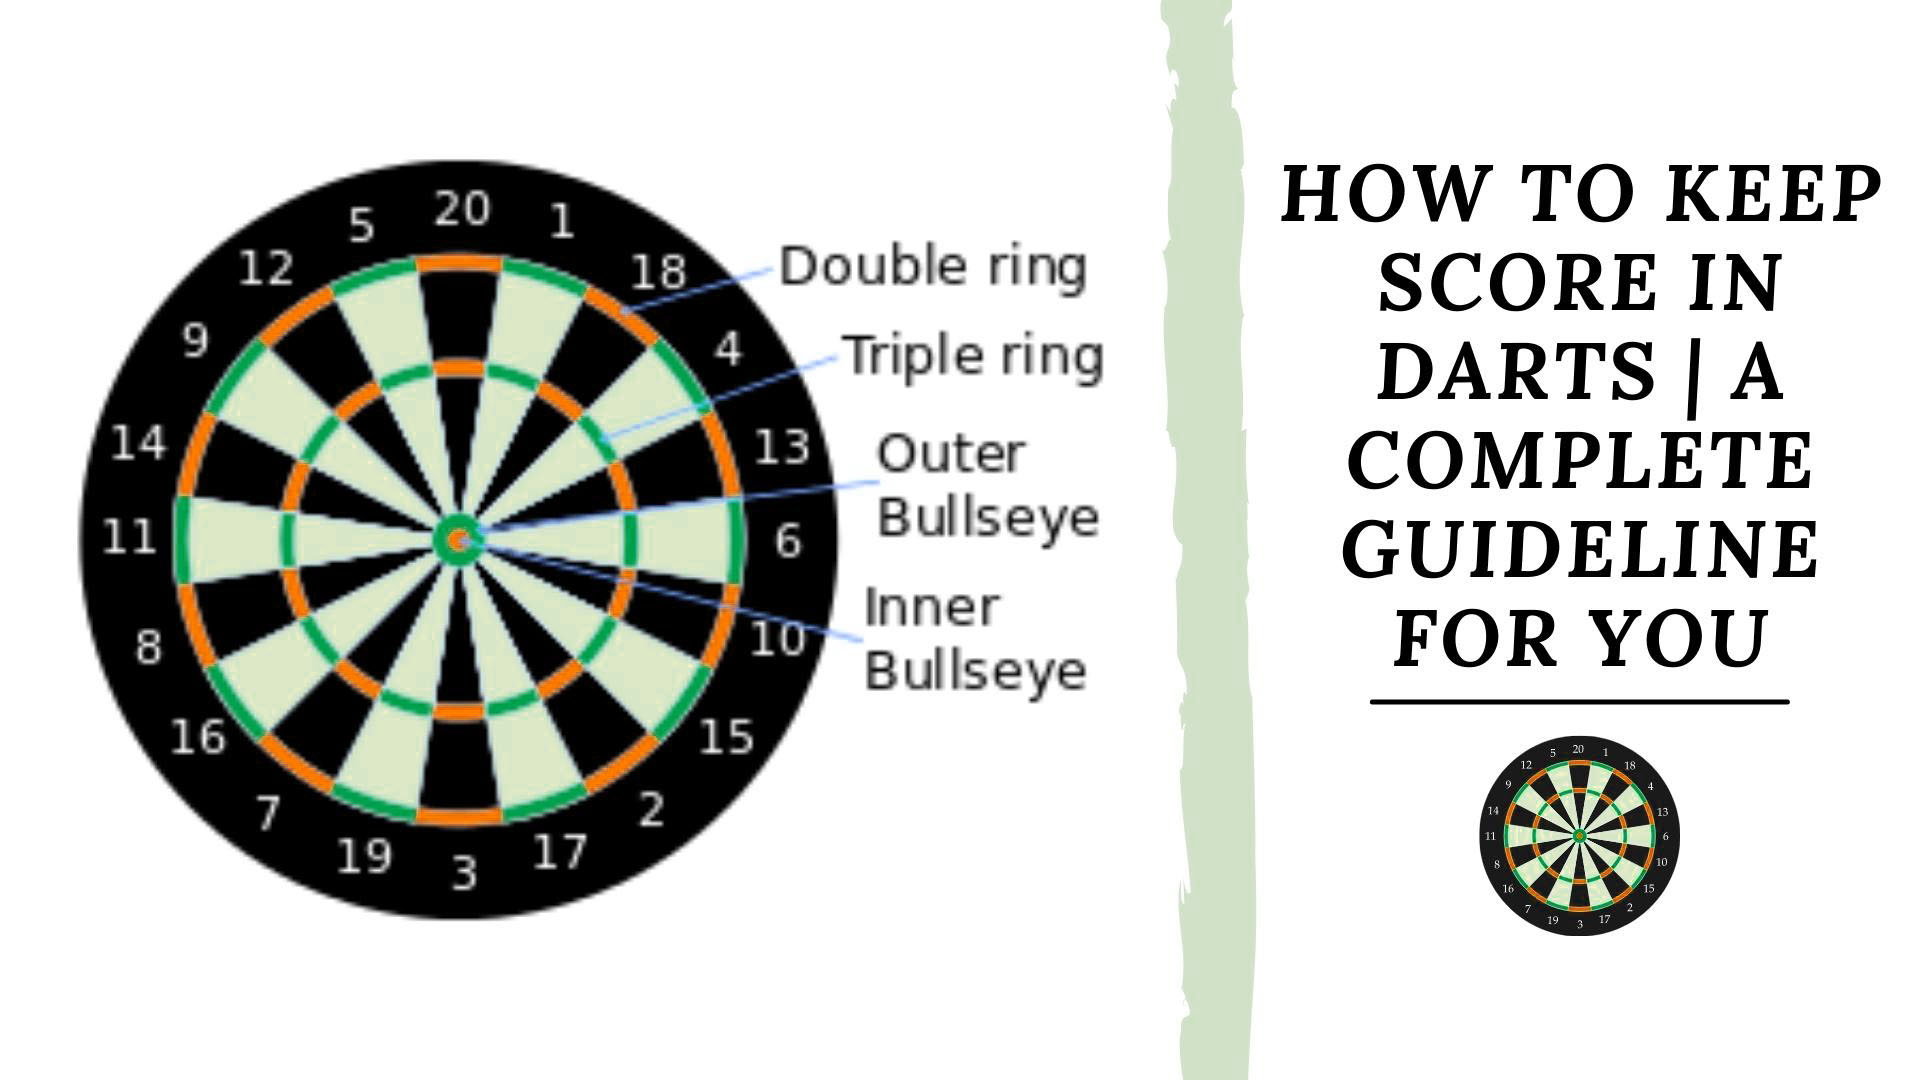 How To Keep Score In Darts A Complete Guideline For You 